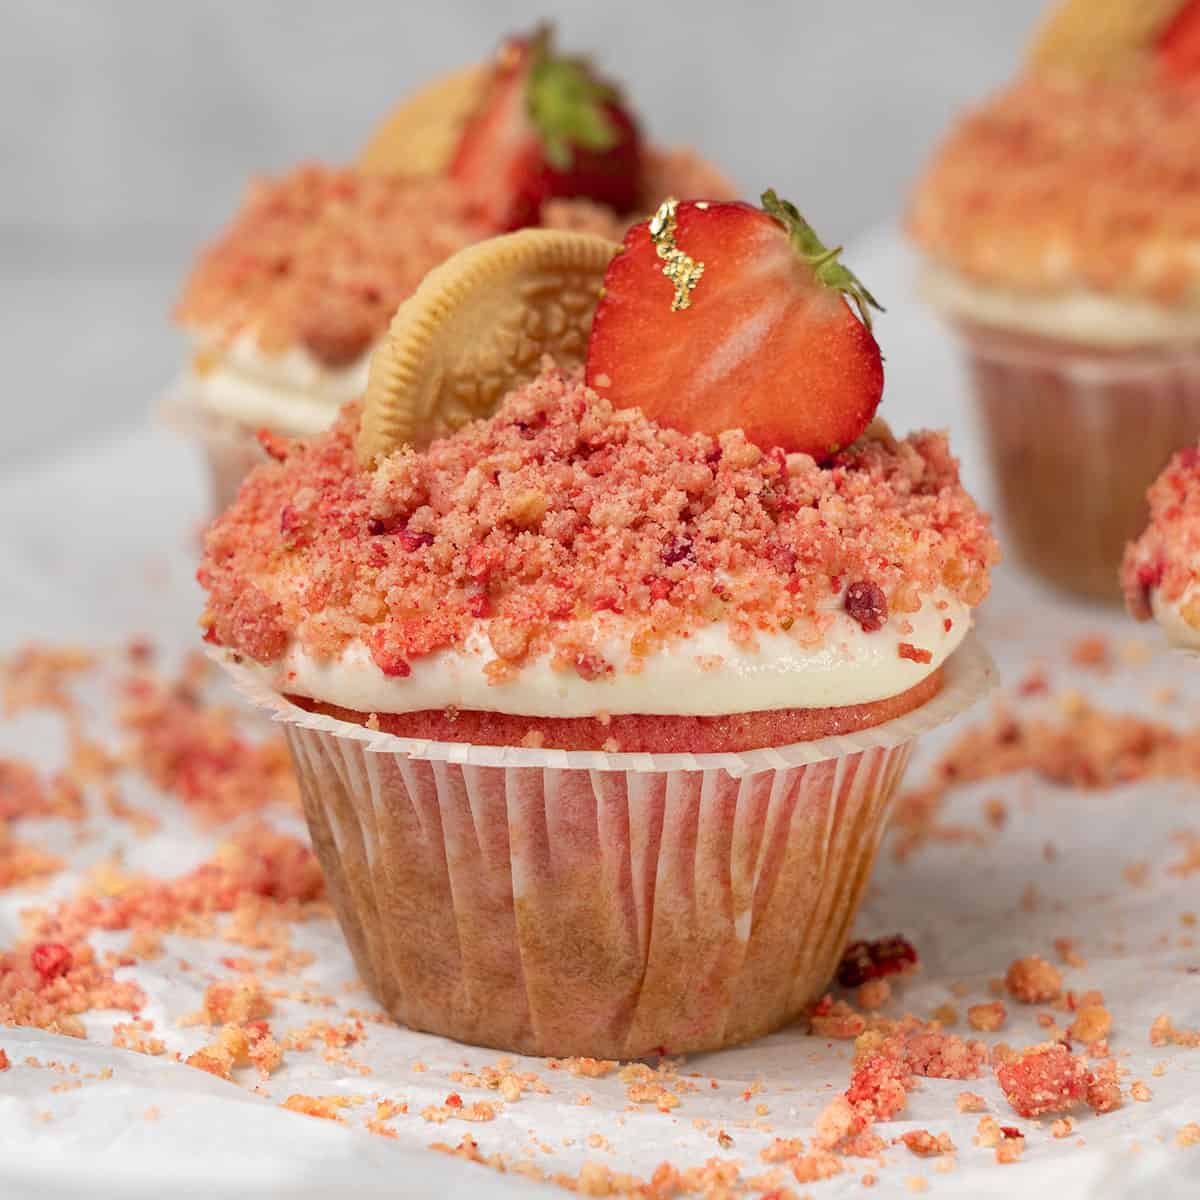 Strawberry crunch cupcakes.